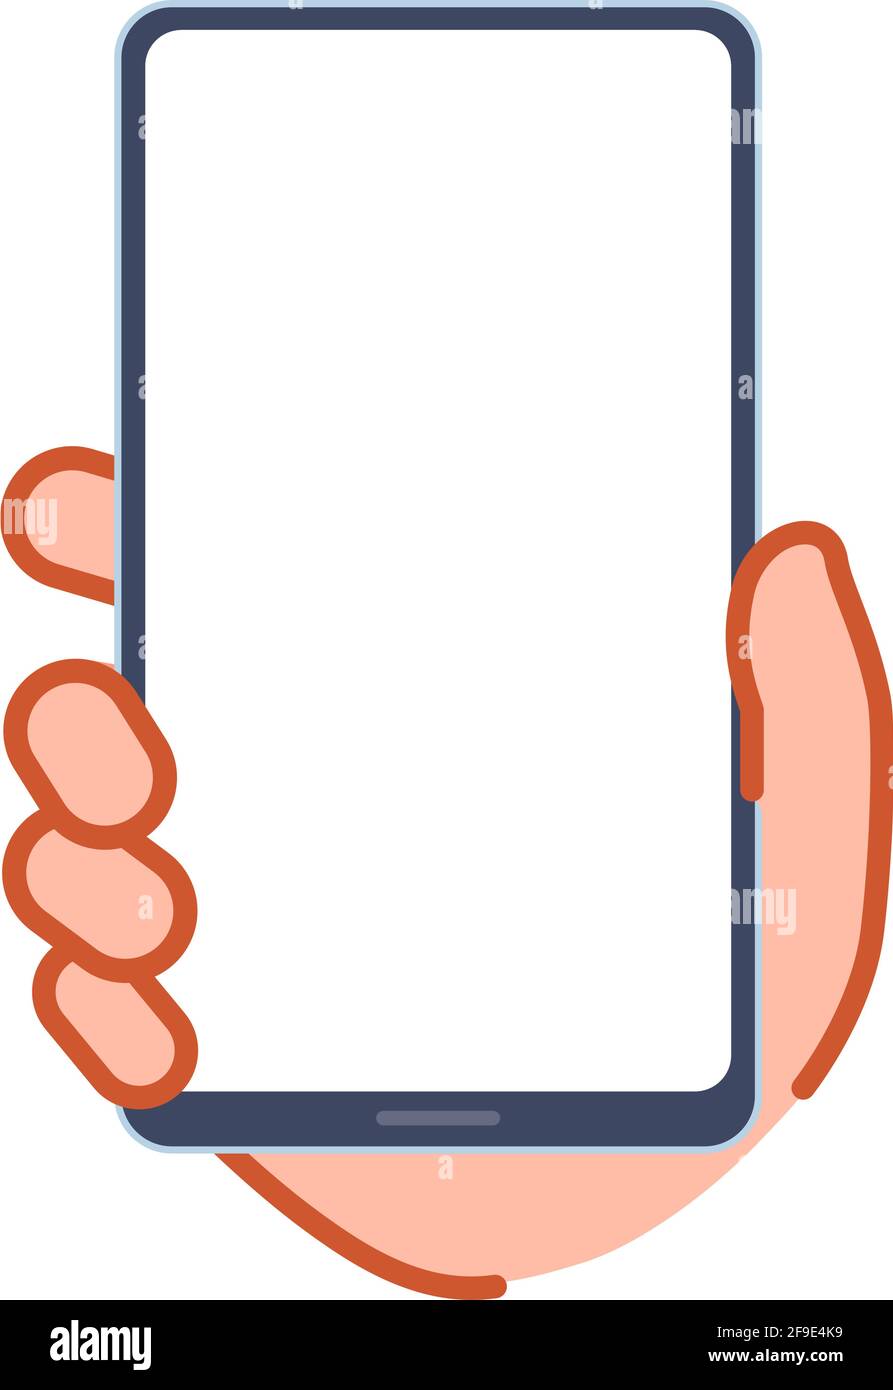 Hand holding a smartphone. Vector illustration that is easy to edit. Stock Vector